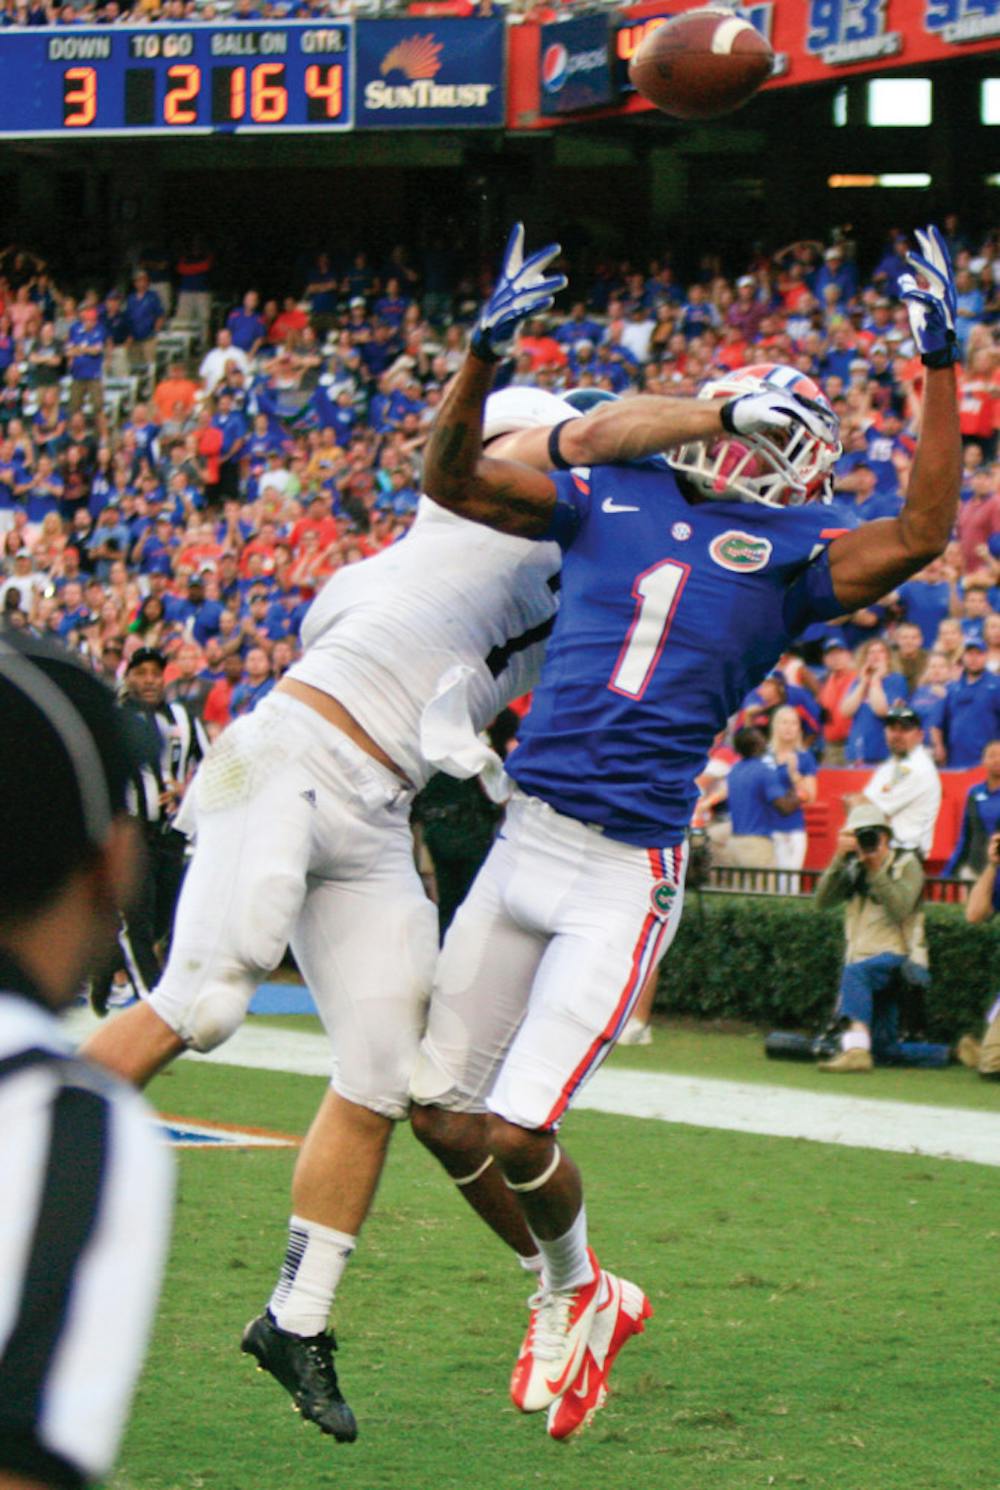 <p>Quinton Dunbar attempts to catch a pass in the end zone during the fourth quarter of Florida’s 26-20 loss to Georgia Southern on Nov. 23, 2013, in Ben Hill Griffin Stadium. </p>